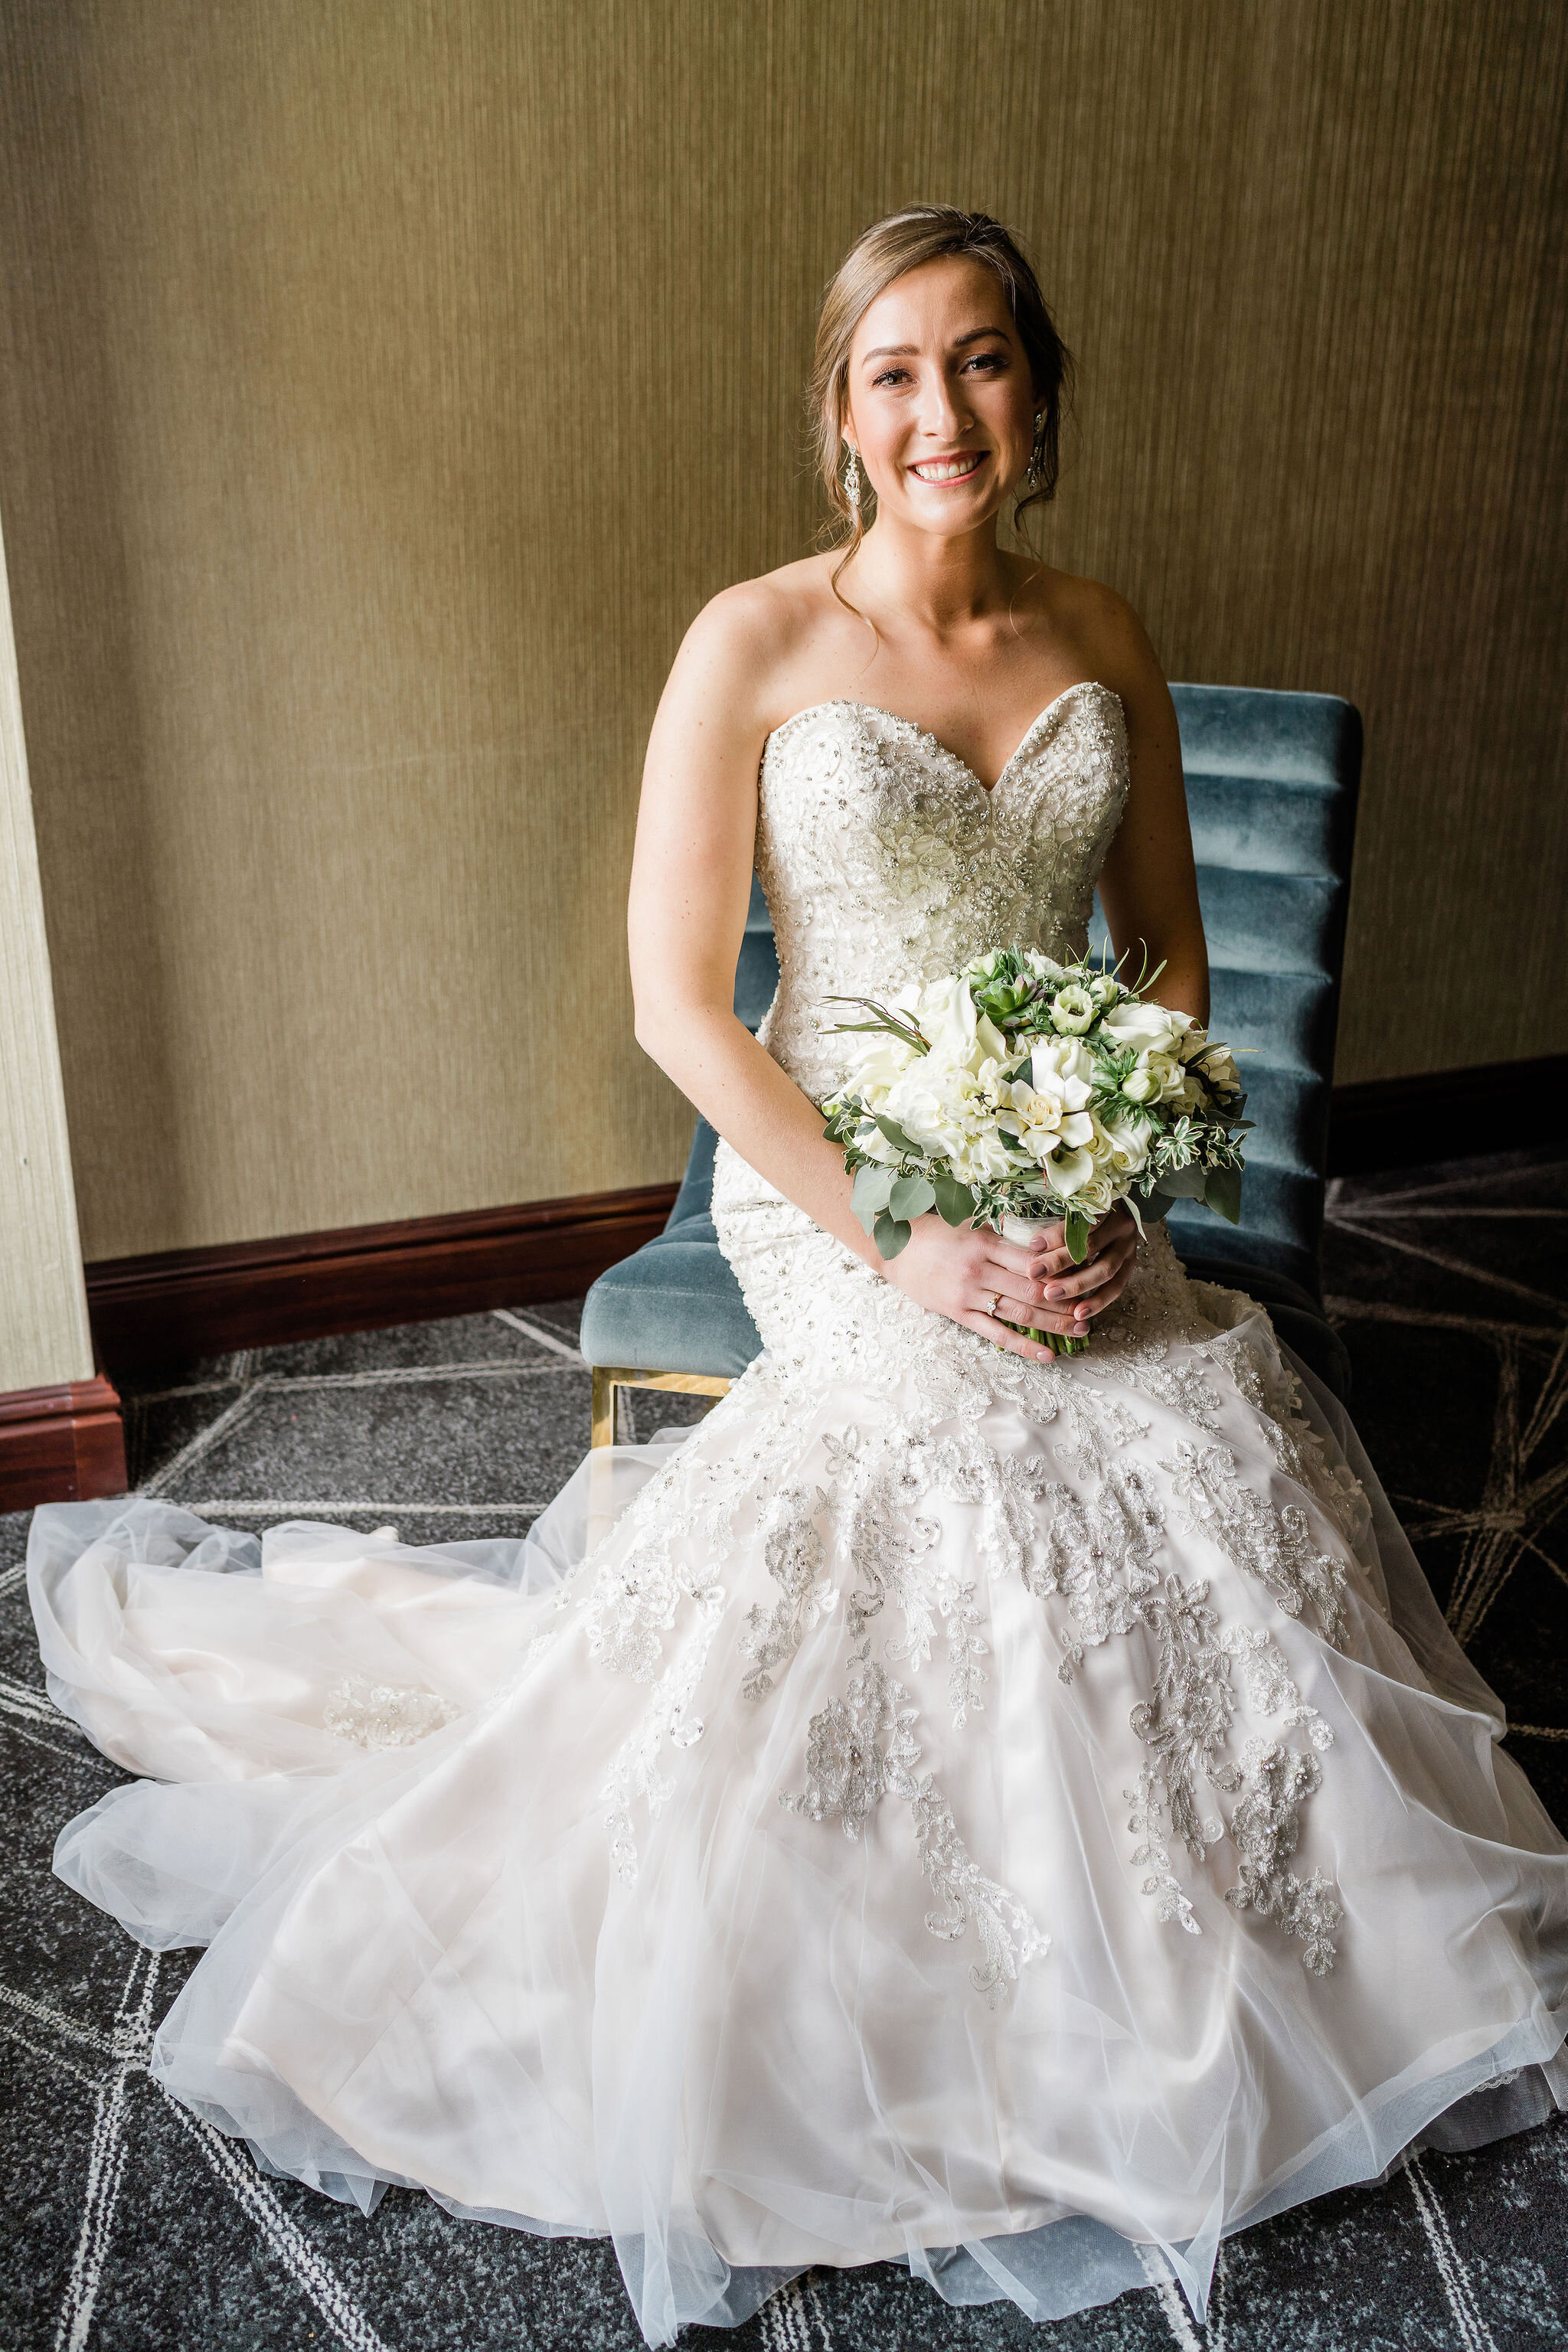 Bride sitting on a chair